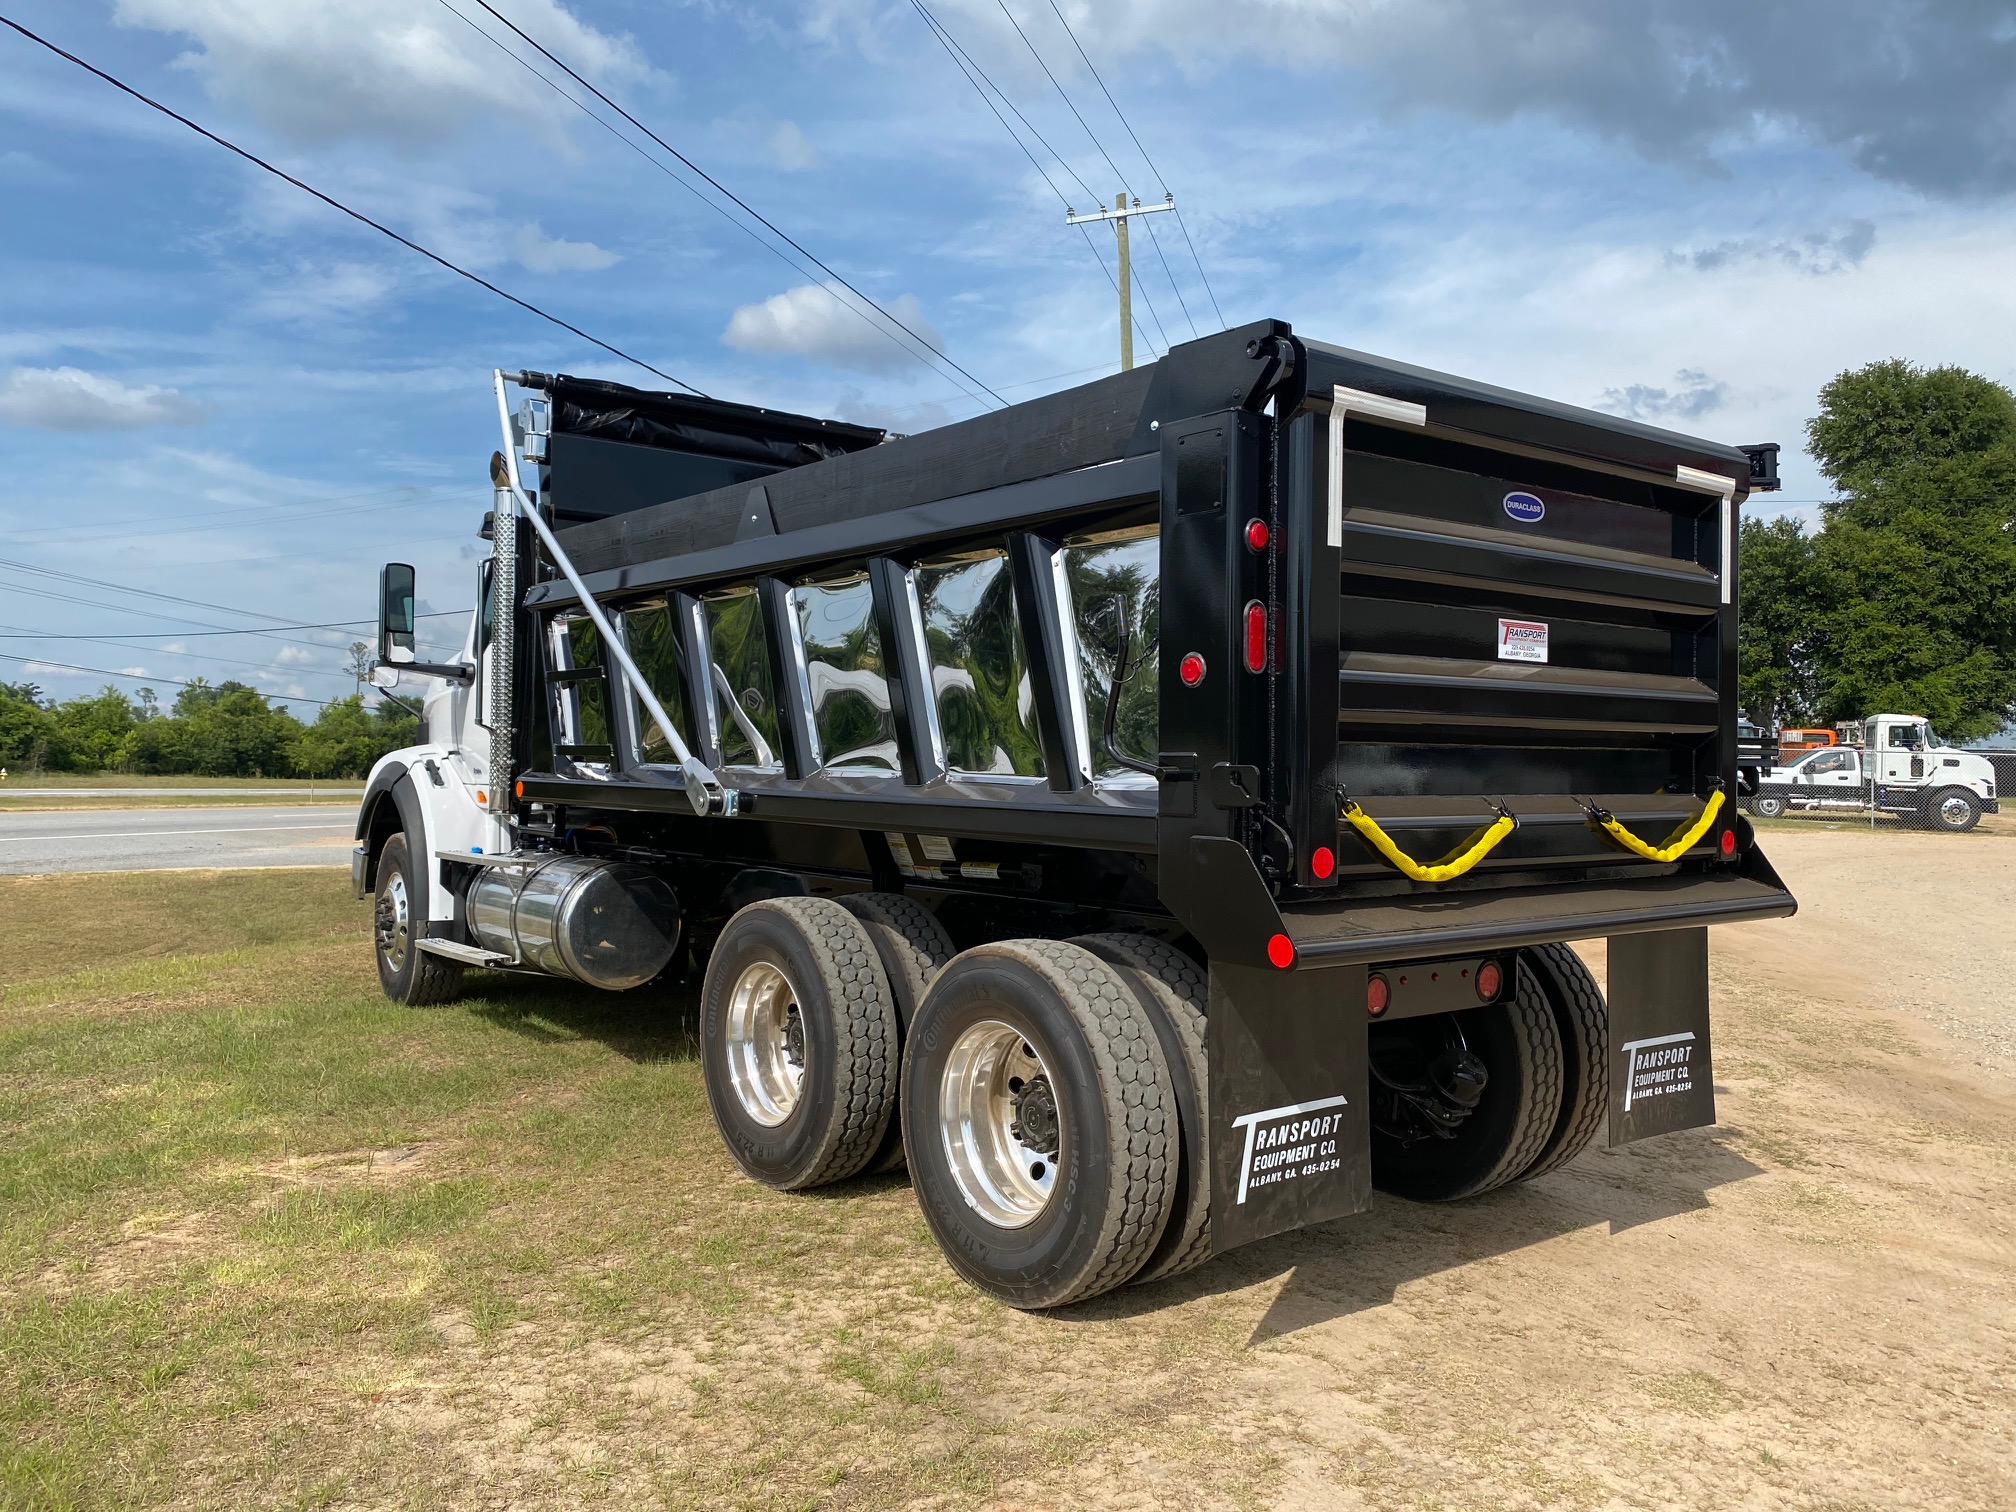 A large dump truck with a black body